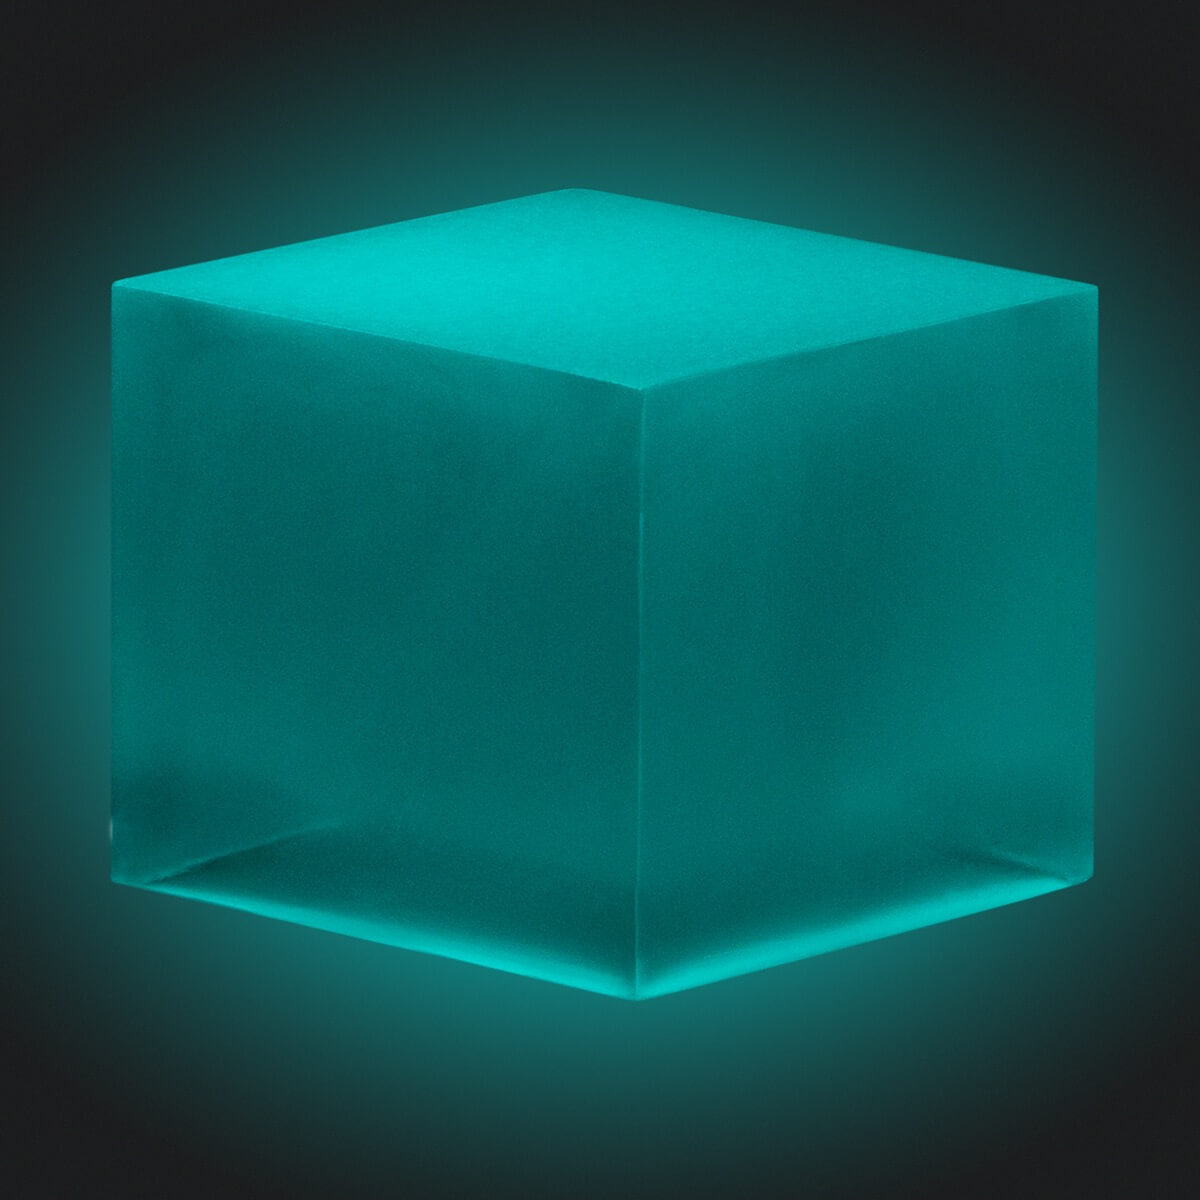 A resin cube made with the Blue Green Glow in the Dark Mica Powder Pigment by Pigmently, seen in a dark environment to showcase the glow effect.